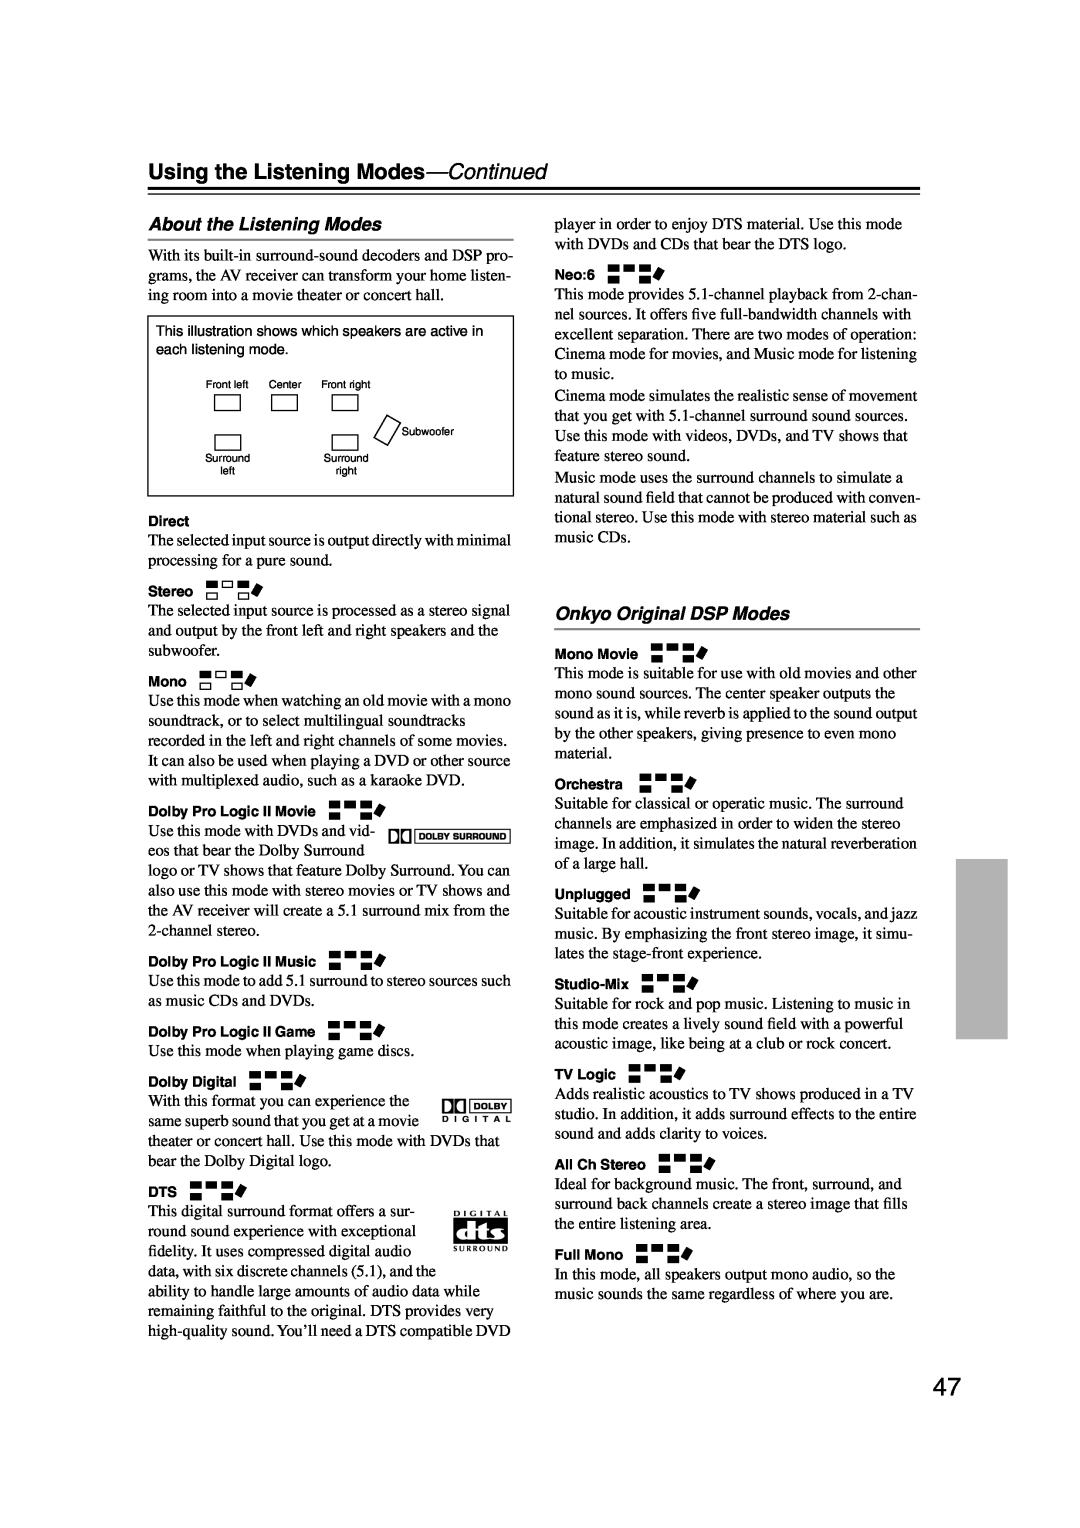 Onkyo HT-S590 instruction manual Using the Listening Modes-Continued, About the Listening Modes, Onkyo Original DSP Modes 